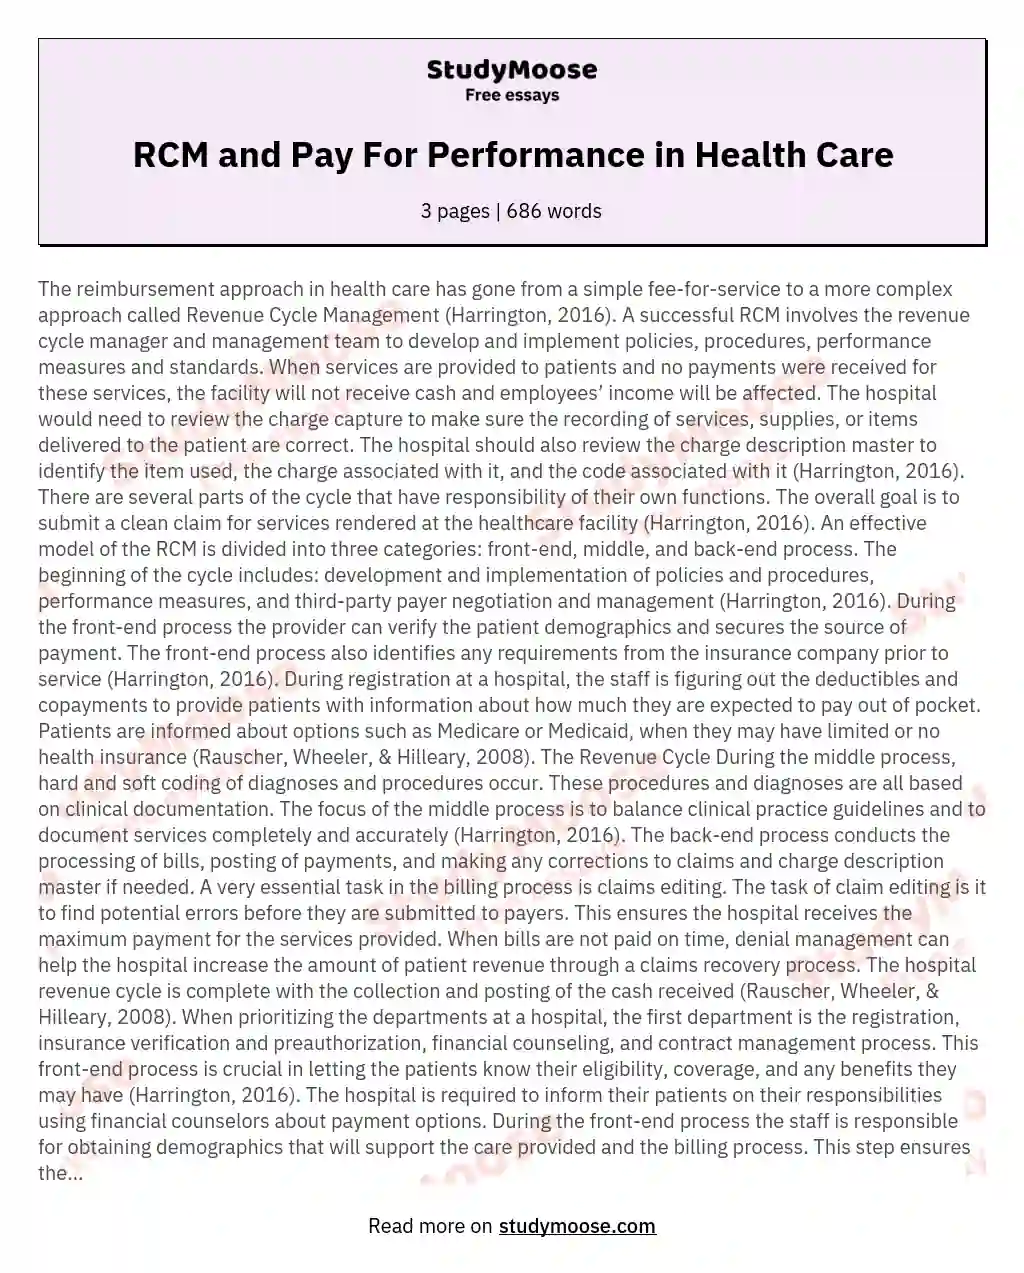 RCM and Pay For Performance in Health Care essay